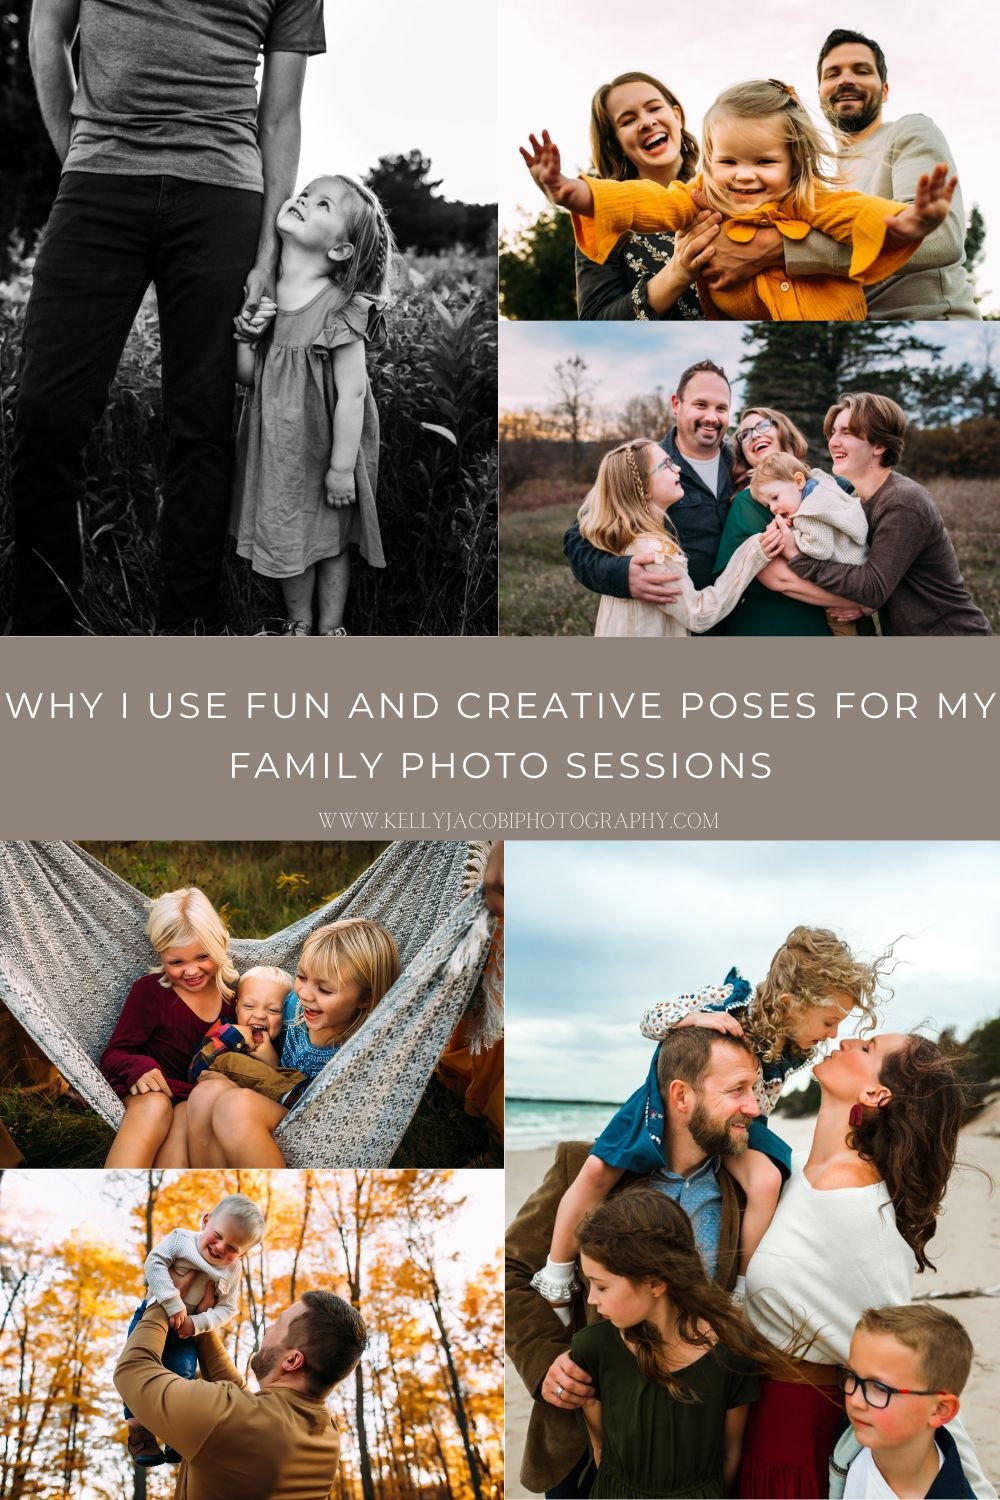 What to Wear Family Photo, Family Photo outfits, family photo poses, Wausau family photographer, Wisconsin family photographer, Green Bay Family photographer, Milwaukee family photographer